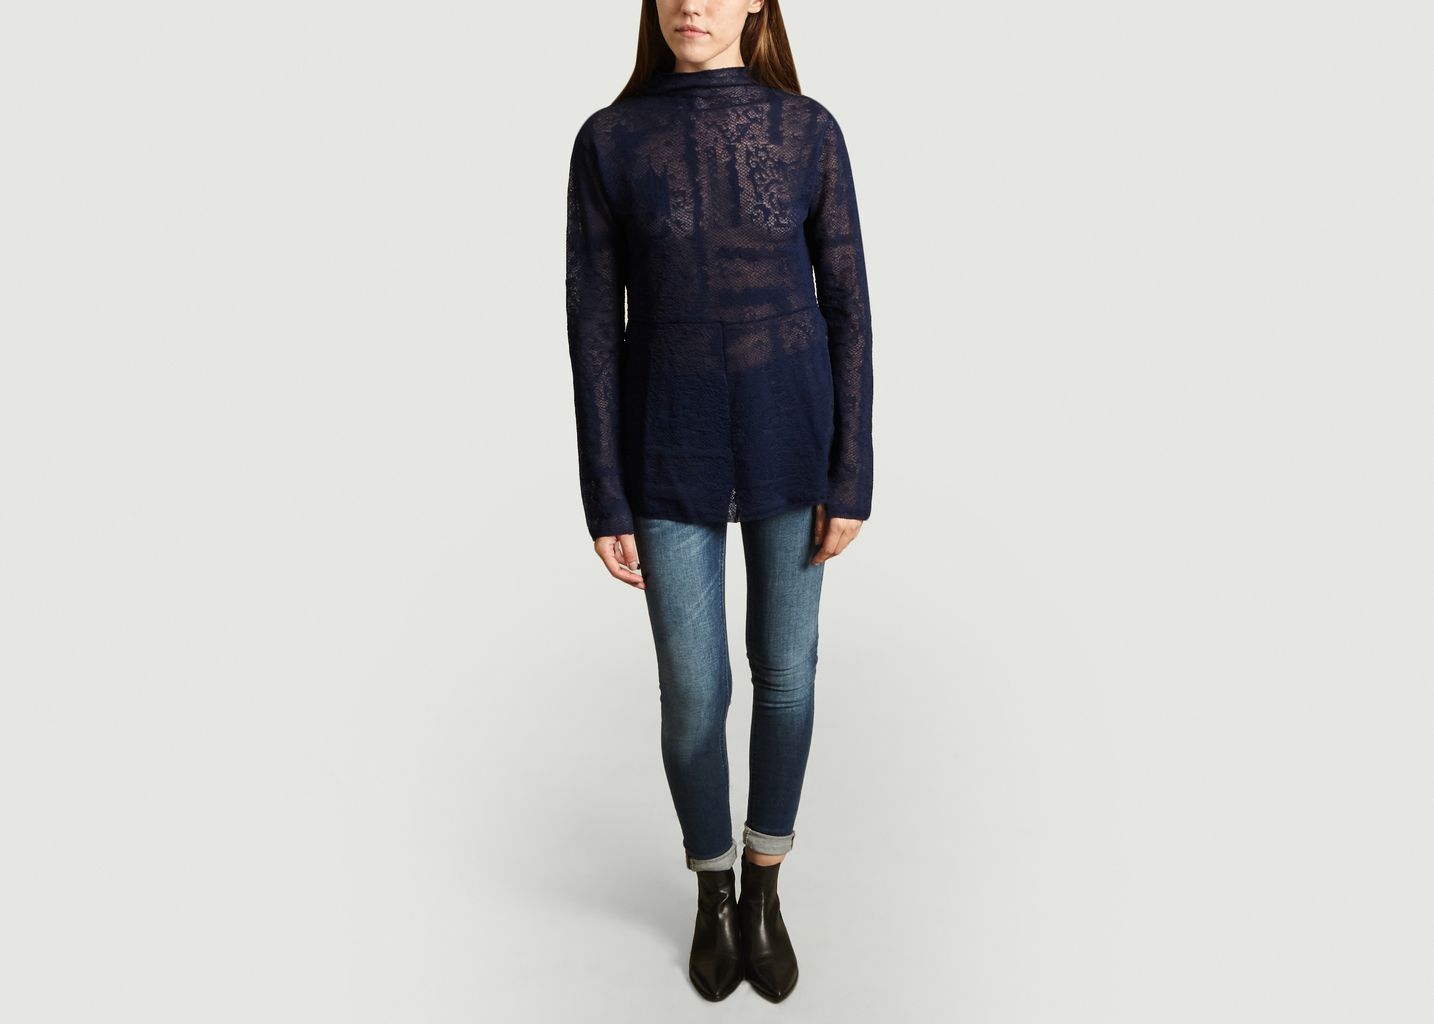 Top Mauria Col Montant Dentelle Nuit - By Malene Birger